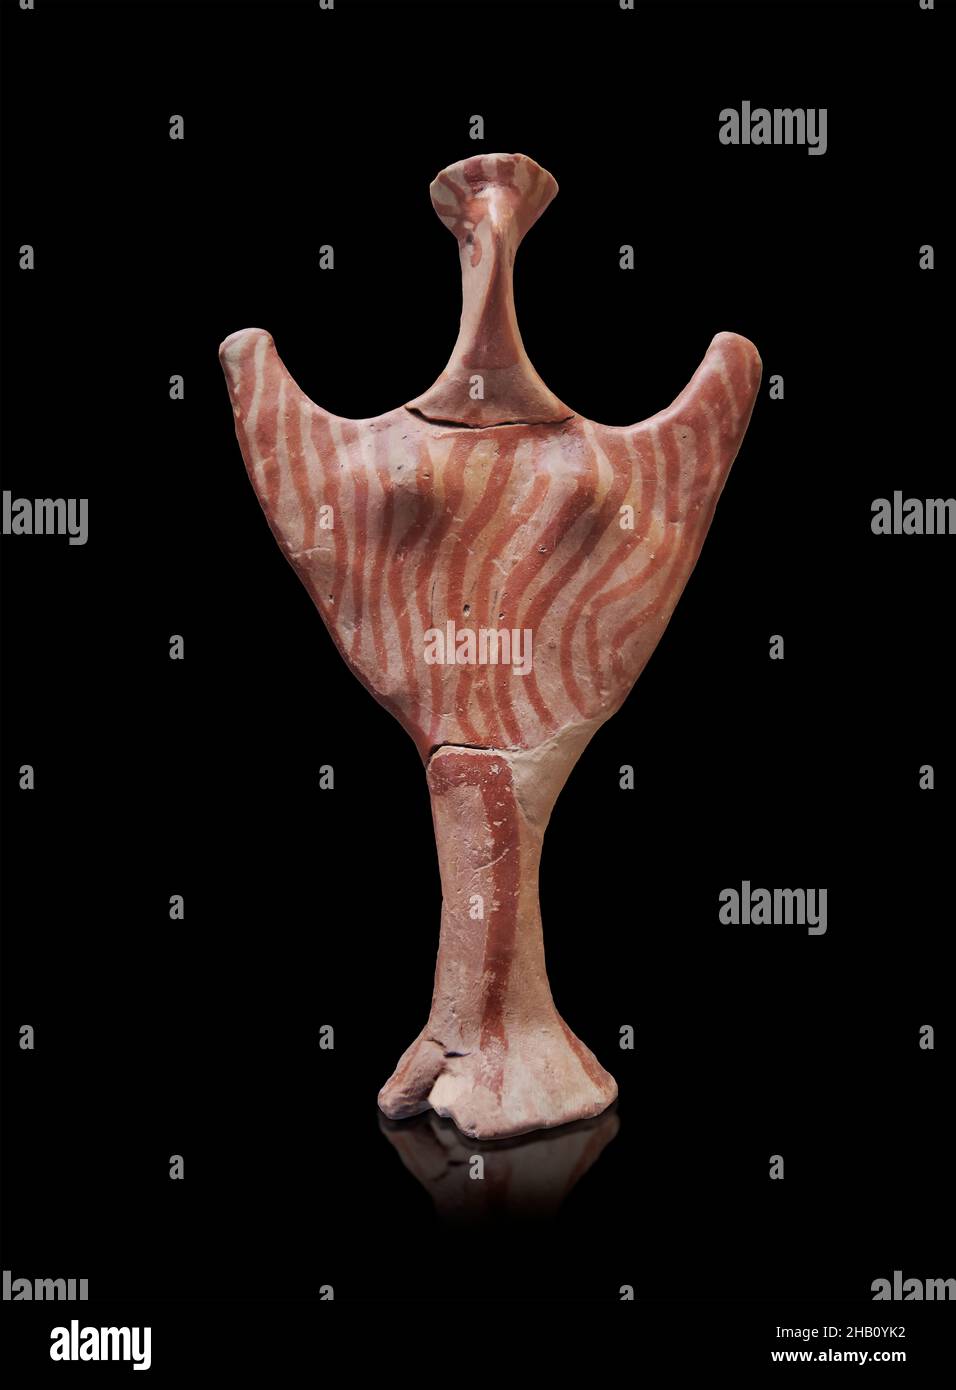 Mycenaean female figurine, Psi type, 1350-1300 BC. Mycenae archaeological site Museum, Greece. From the Petas House Group, Room F. Ref LH IIIA2.  The Stock Photo